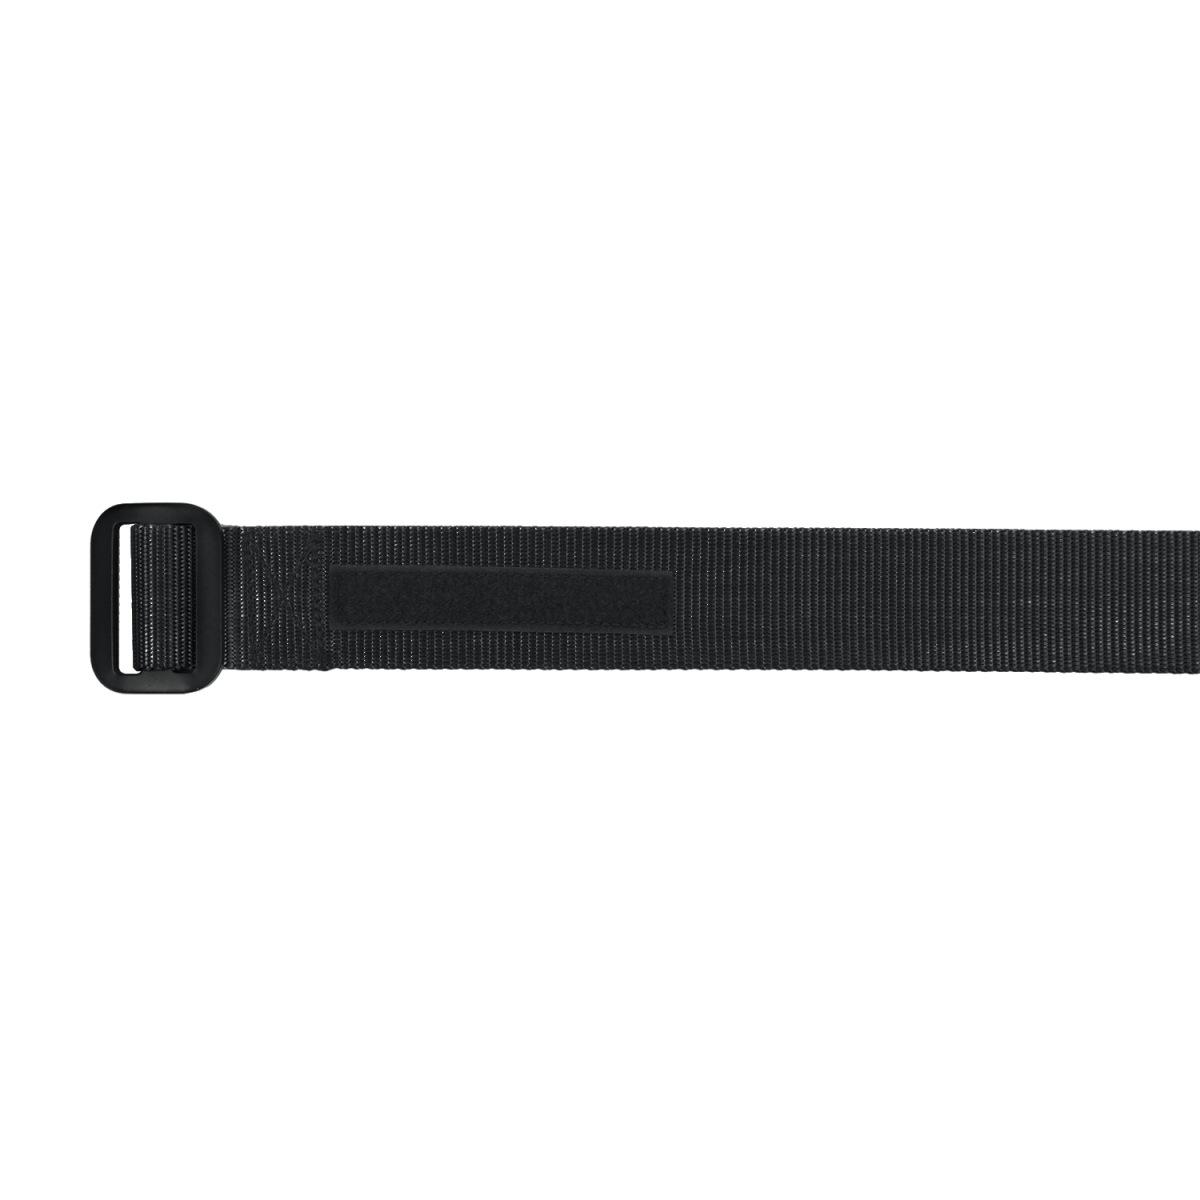 AR 670-1 Compliant Military Riggers Belt Rothco